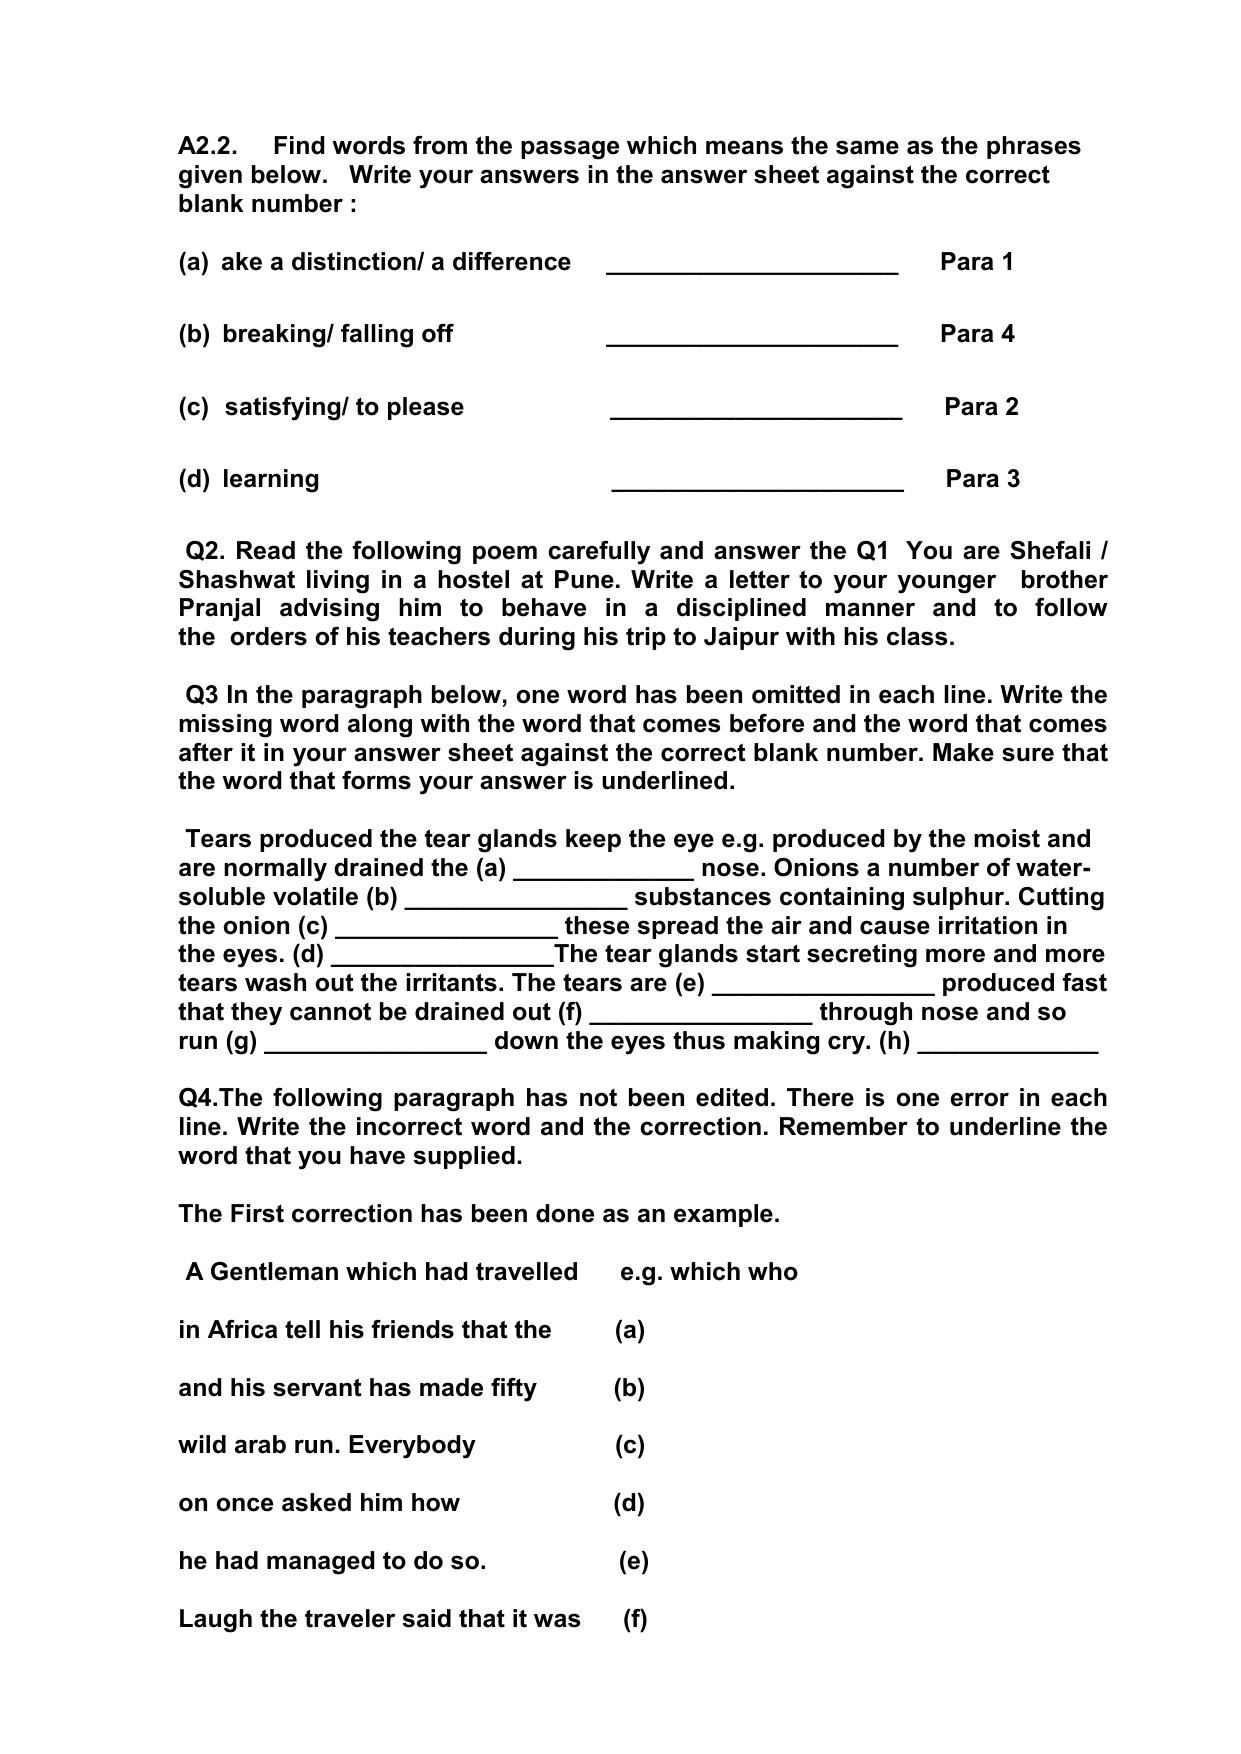 CBSE Worksheets for Class 9 Assignment 9 - Page 3